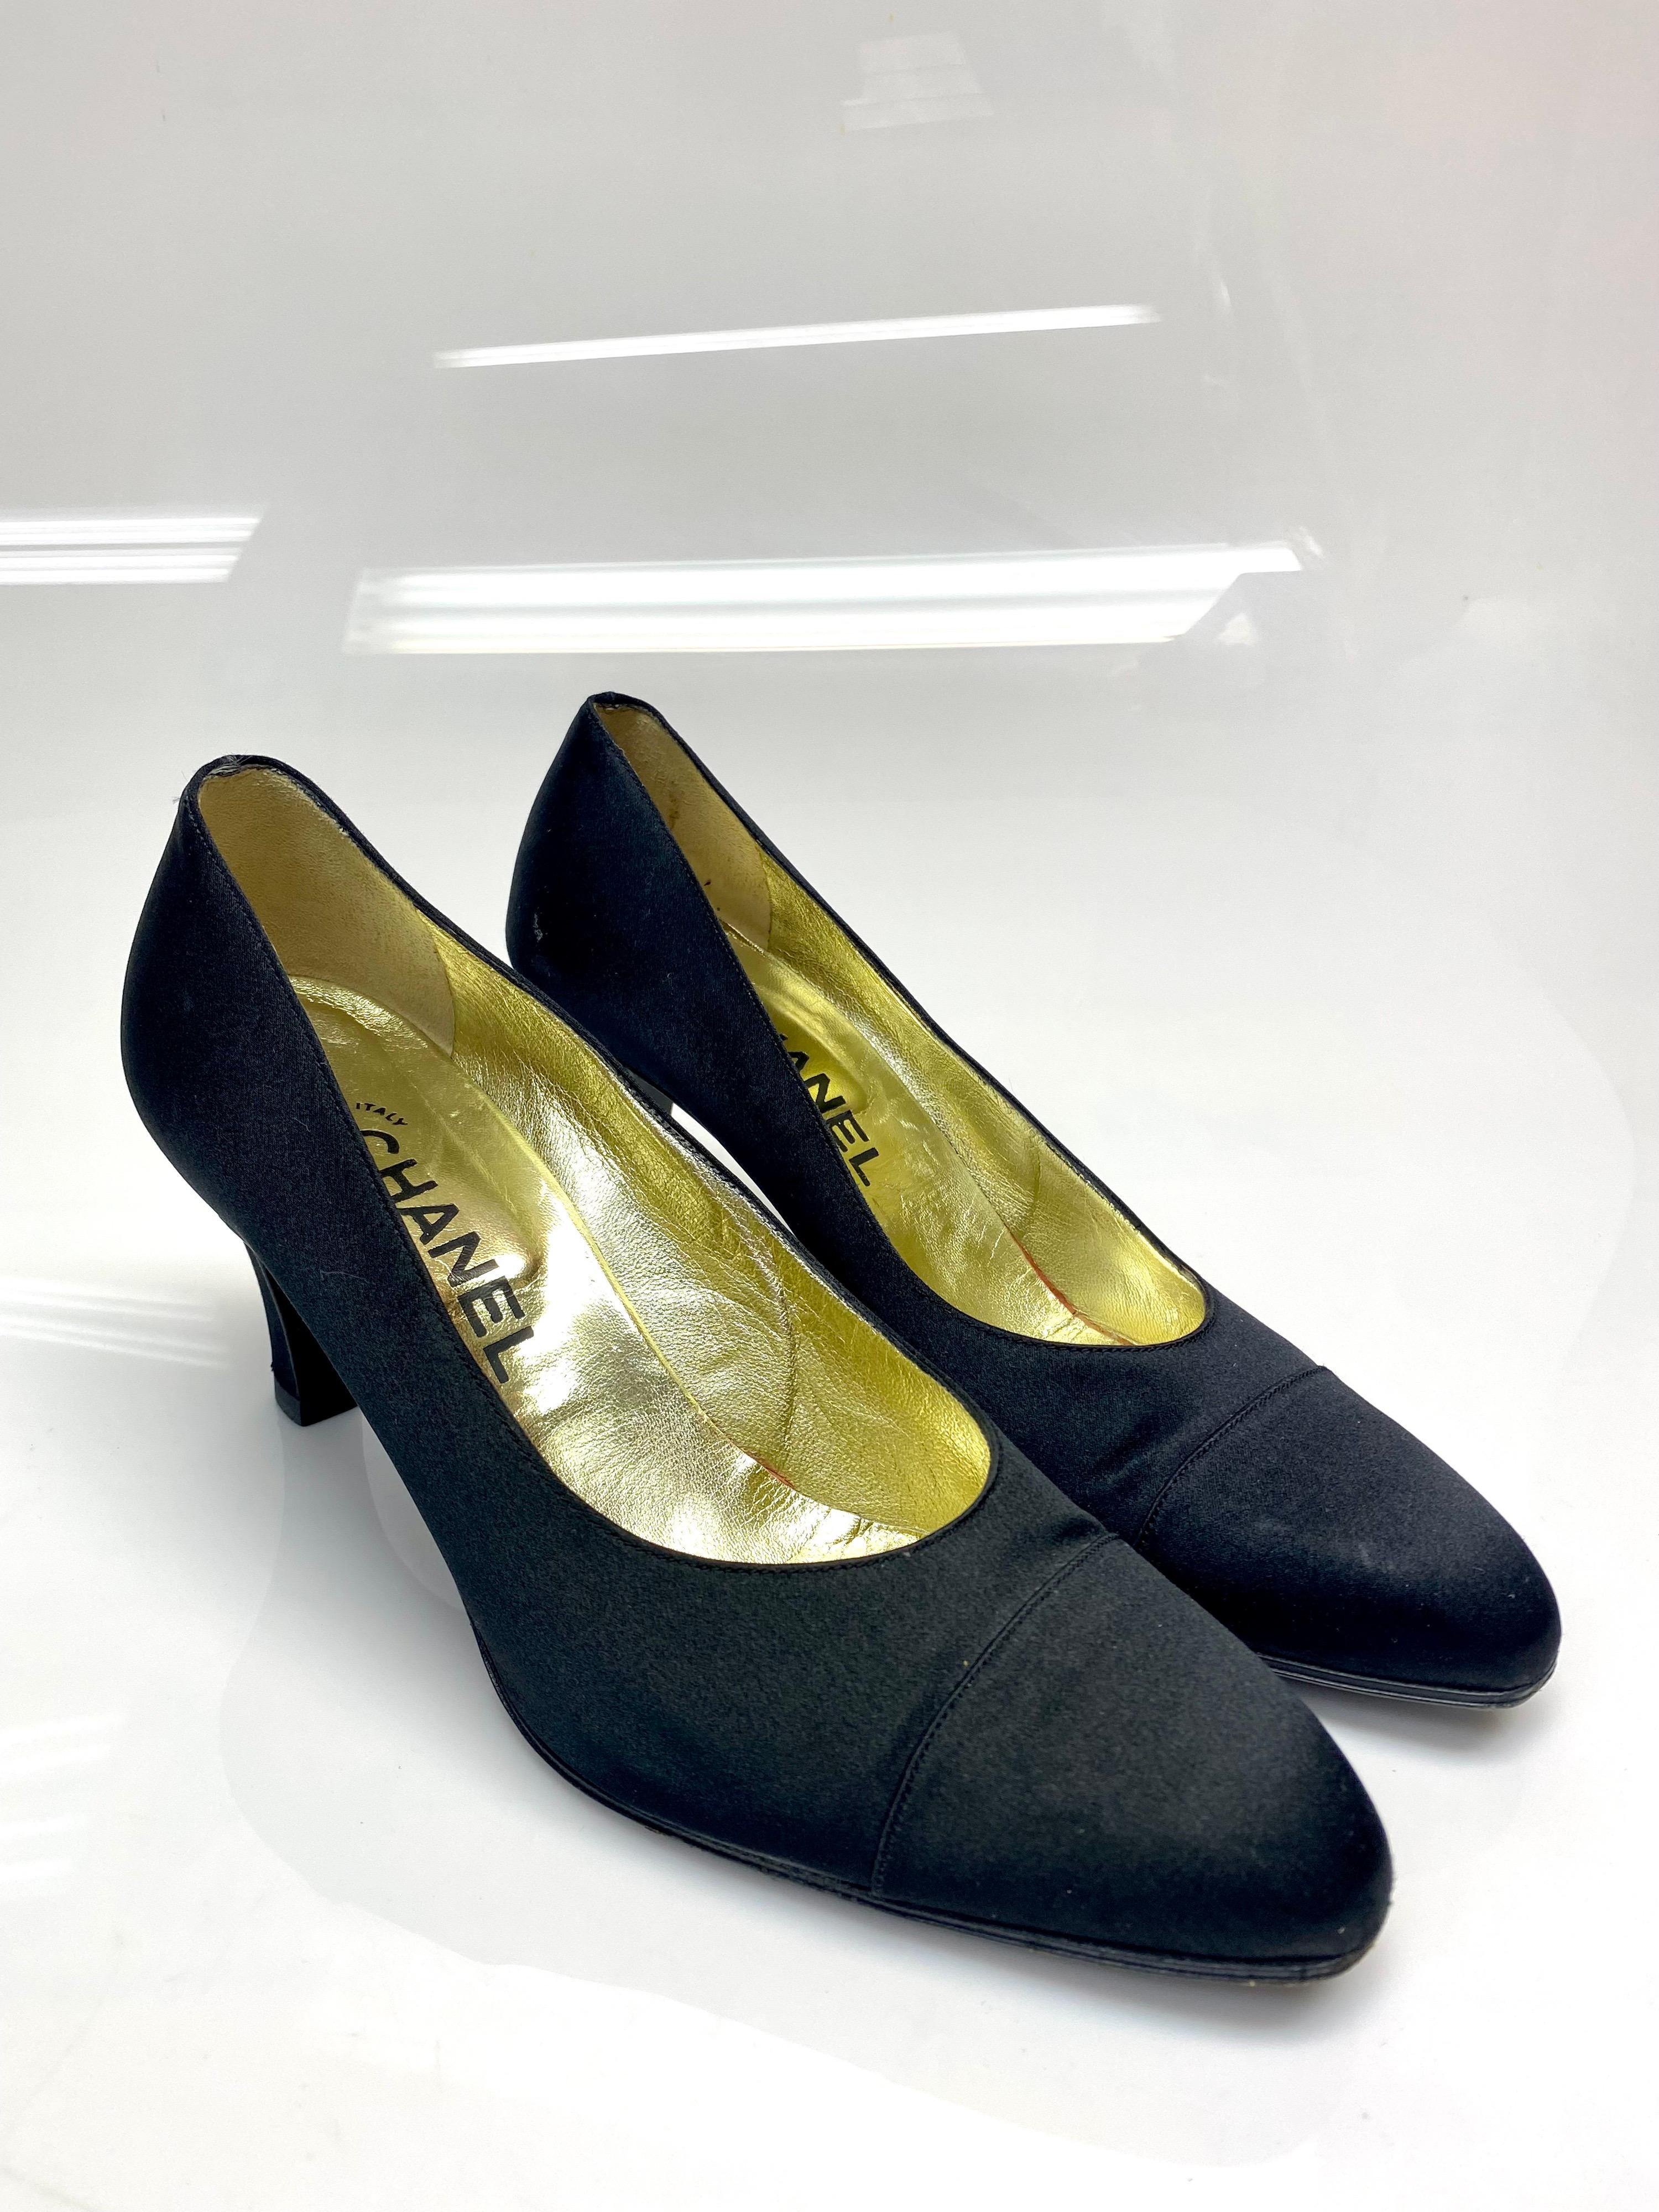 Chanel Vintage Black Satin Pumps Size 38.5. These 1990’s timeless vintage pumps by Chanel are absolutely stunning. The black satin and rounded toe gives the pump a sophisticated look. Item is in good condition with some marks on the satin